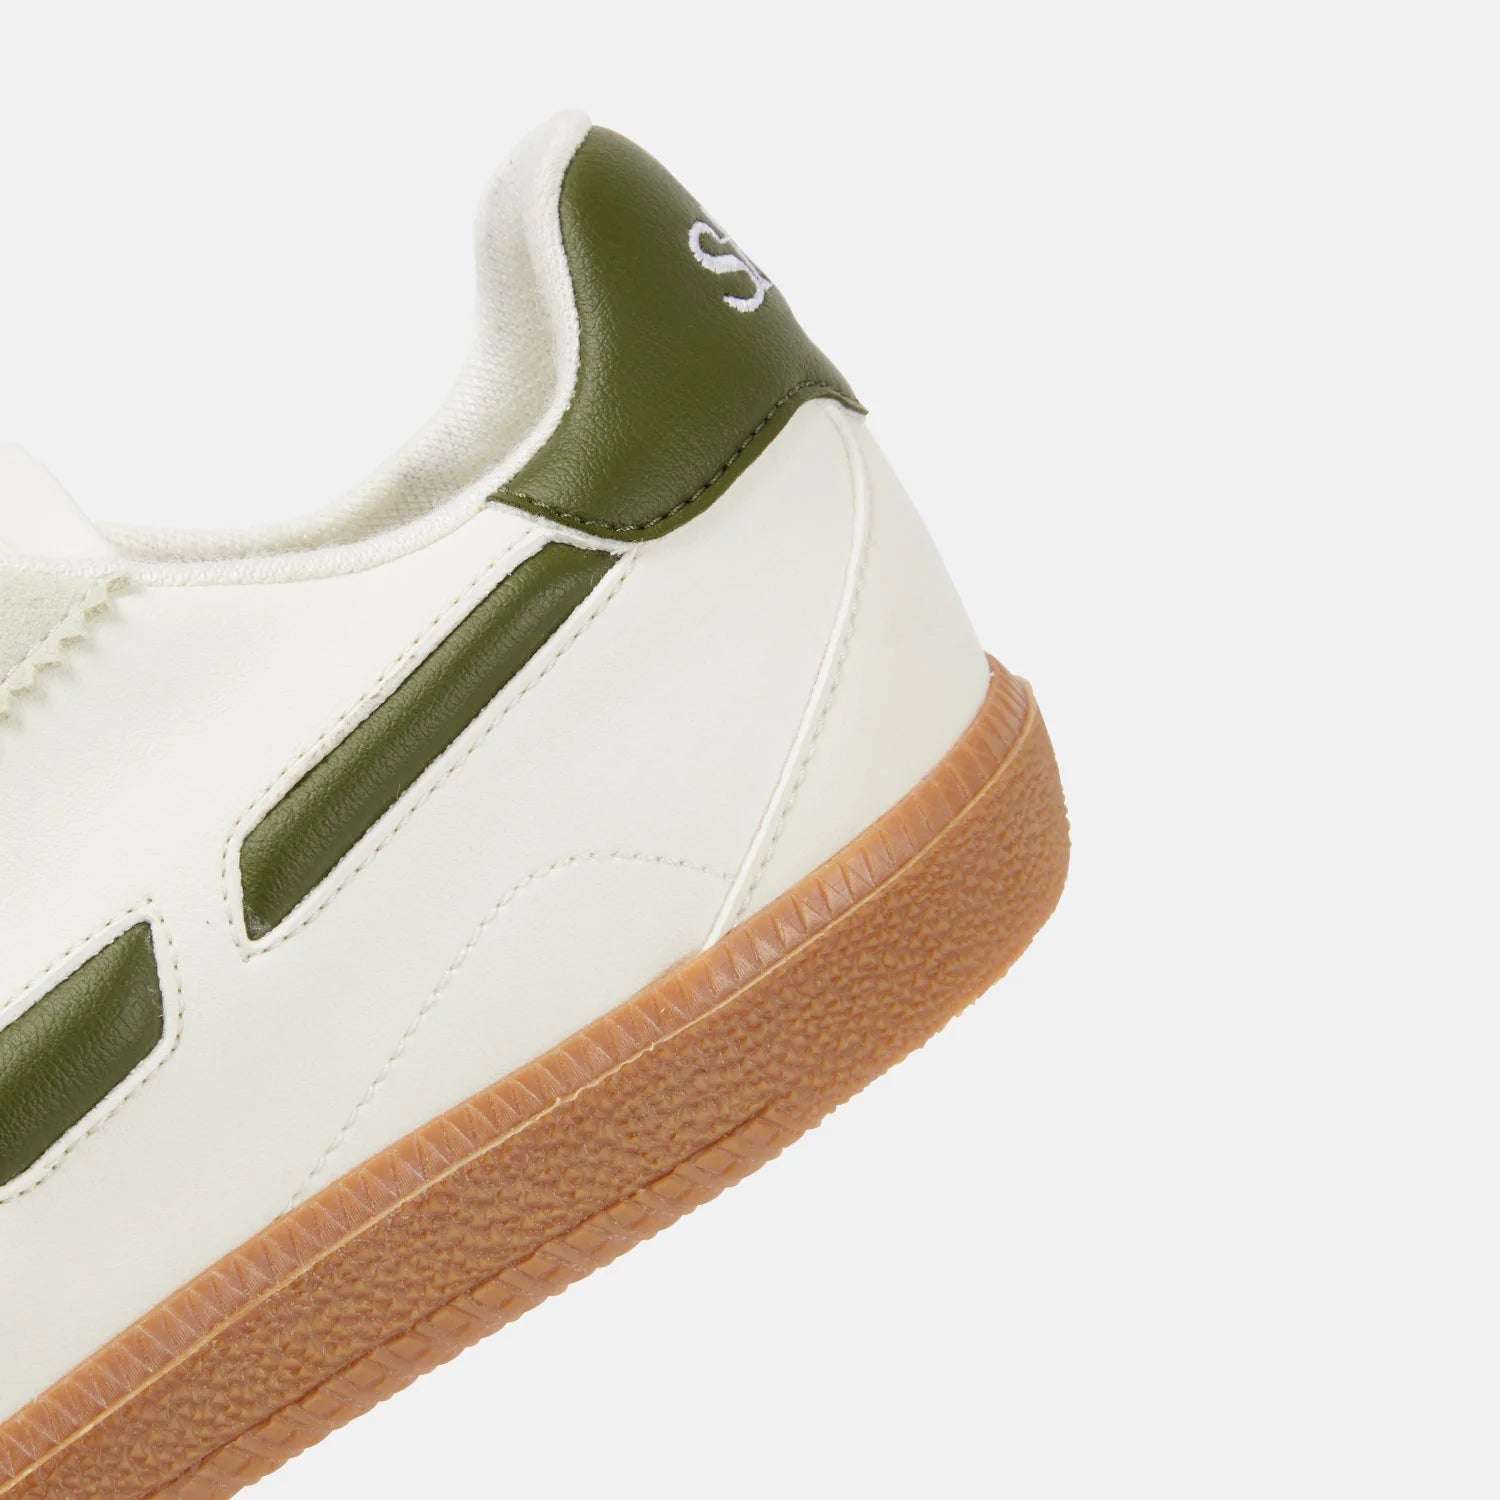 off white sneakers with dark green detail on sides